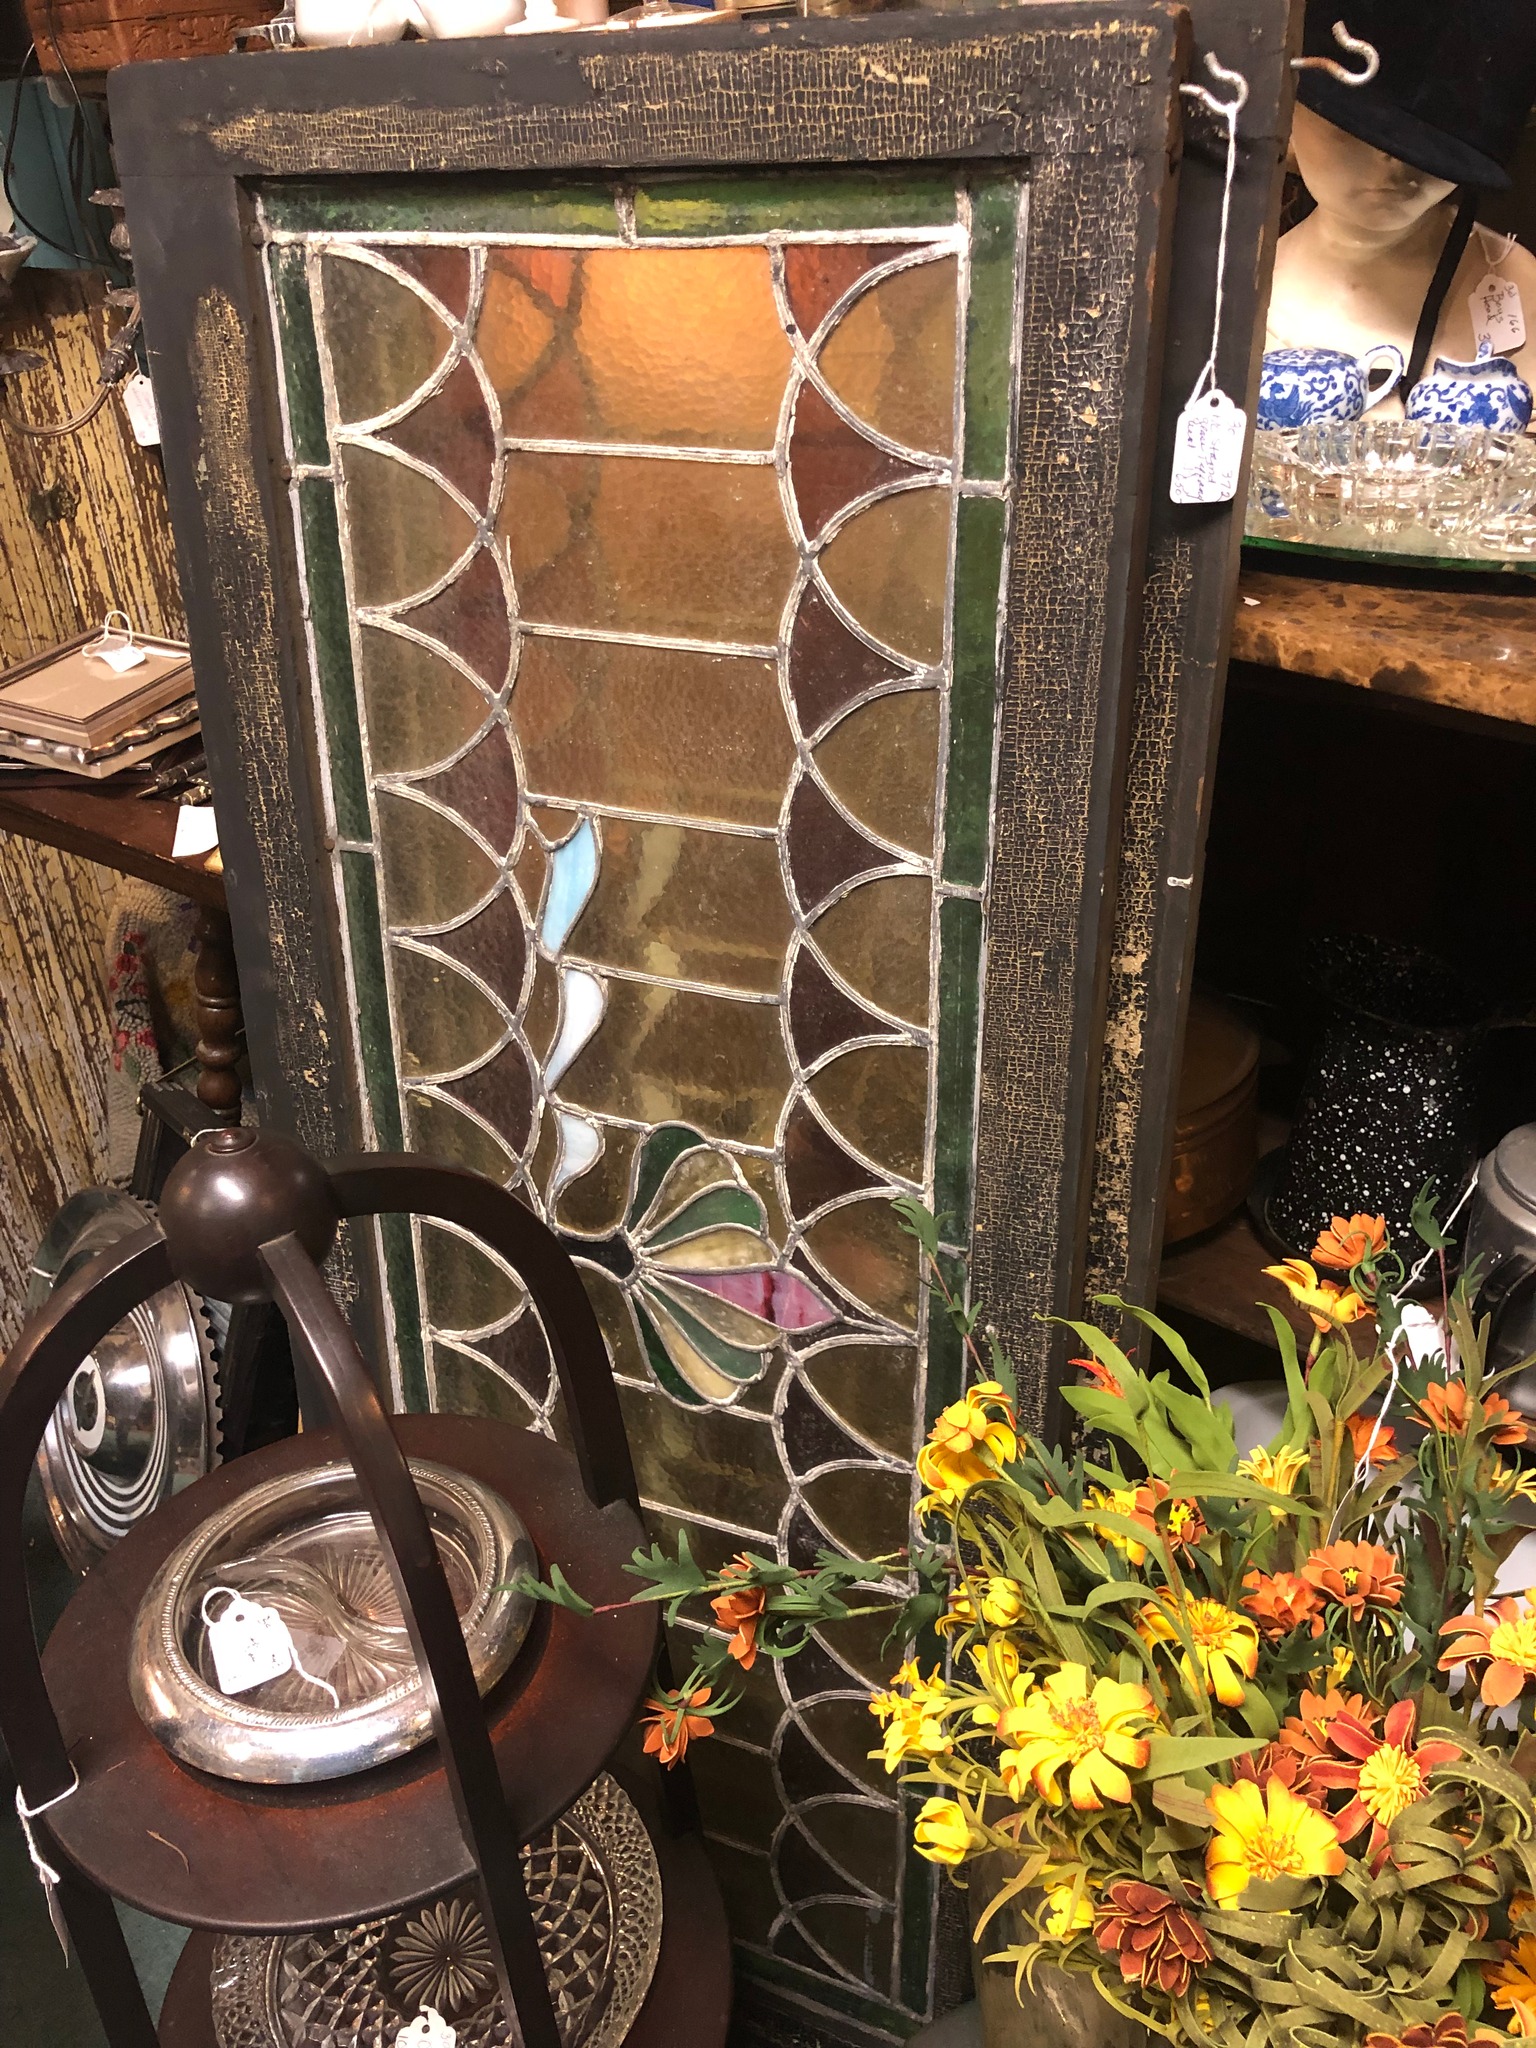 Scranberry Snapshots - Scranberry Coop Receives 2022 Best of Andover Award! - Scranberry Coop - Vintage Store - Antiques, Collectibles, & More